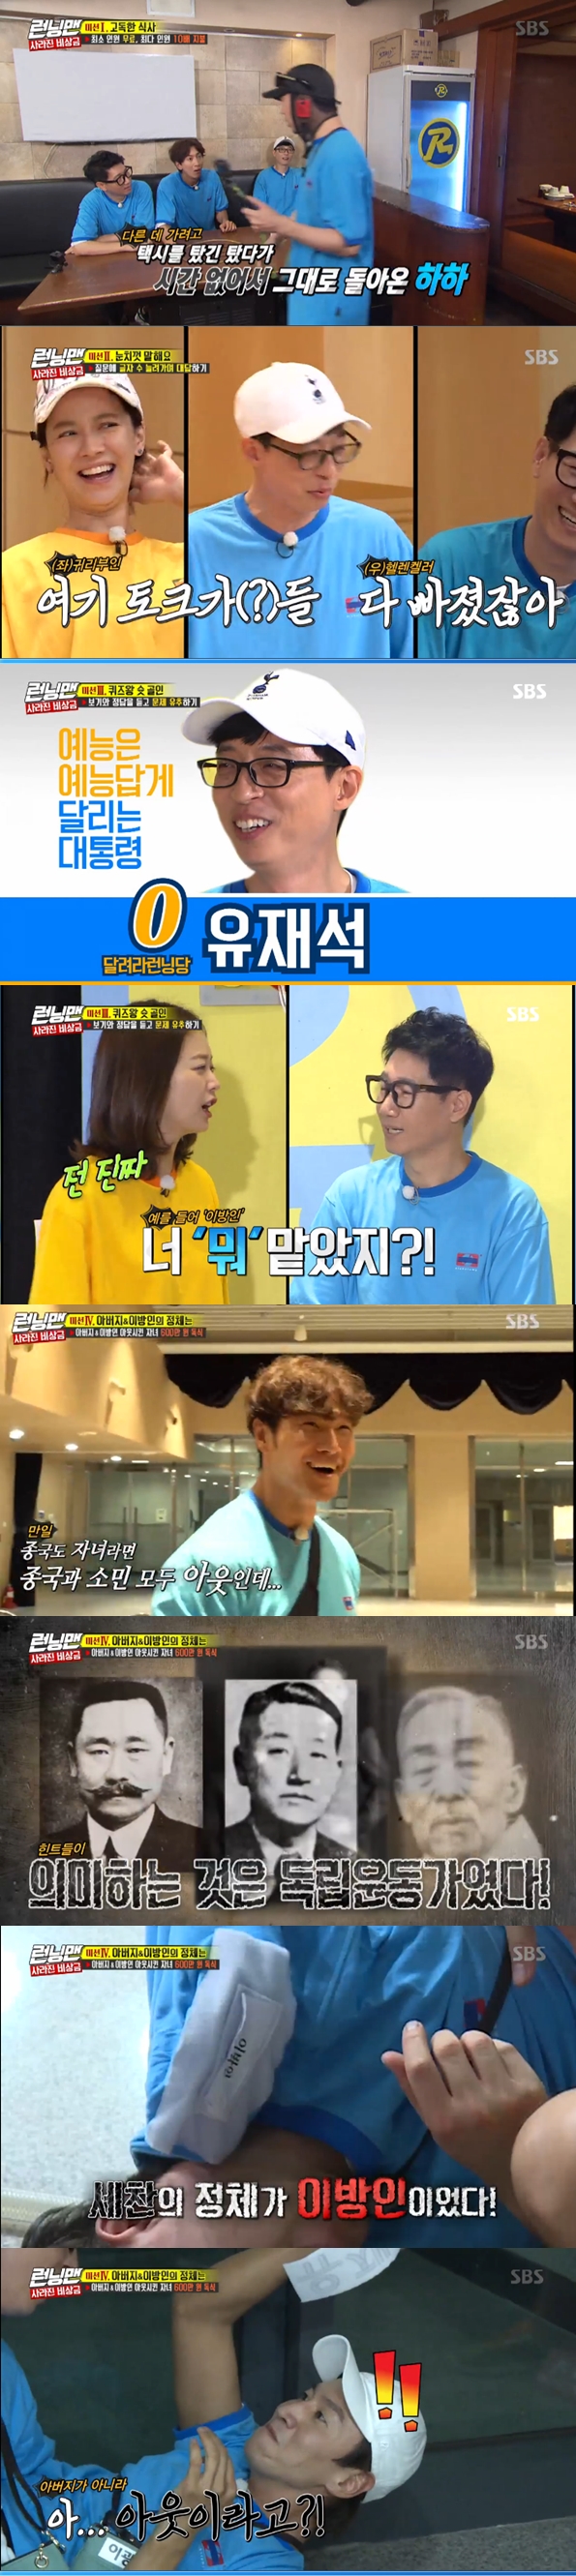 Ji Suk-jin won the title without any performance.In the SBS entertainment program Running Man broadcasted on the afternoon of the 18th, Race of Missing Emergency was held to catch the father who withdrew 6 million won.From the opening, Ji Suk-jin was besieged by members; he complained that the weather is too hot before the opening.Yoo Jae-Suk, who arrived a little late, heard Ji Suk-jins complaint and said, What is it in the 50th summer?Yoo Jae-Suk then teased him and laughed when he saw that Ji Suk-jins clothes were not UFC but UFO.This week Race was a race looking for a scared emergency fund.The crew gave the members a mission to find their father and The Stranger while Miri Jung Hanonon was recording the father who withdrew 6 million won from the members and the Stranger who was trying to steal it.Yoo Jae-Suk, who heard the mission, laughed at Lee Kwang-soo and suspected Baro, Is not it the Stranger?The first mission to receive hints about The Stranger and his father was a lonely meal; members visited one of the restaurants the crew had set Miri.The fewest members were exempted from the meal fee. The members went to the restaurant in a pair of three or three pairs.Lee Kwang-soo, Yang Se-chan and Haha joined forces to save Taxibi.After arriving at the Pyongyang cold noodle house, the three people decided to play a game there and leave only one person.The three arrived at the cold noodle house and started the game, and Ji Suk-jin and Yoo Jae-Suk came into the cold noodle house.Five people played Game, and Ji Suk-jin became the final Winners -- Losers.But the four who were kicked out played a separate game outside the store, leaving Lee Kwang-soo and Yang Se-chan back in the store.Ji Suk-jin panicked but agreed to play the final game to set one final; the final Winners & Losers were Lee Kwang-soo.However, Yoo Jae-Suk, Ji Suk-jin, and Haha, who lost their place to go, came in turn, and the four people gathered at the cold noodle house were 10 times the price of cold noodles.Lee Kwang-soo laughed and laughed, saying, Why did you do a game if you did this?The first mission Winners & Losers was won by Song Ji-hyo, who saved Taxi.She went to the Kimchi-steamed shop alone without teaming up with other members from the start; no member came there, and Song Ji-hyo was exempted from the meal as it was.She then used Choices for her father, Song Ji-hyo, who had the hint of Father is not AB type among the two hints, with members and Gong Yoo.The second mission was Tell me the best of the time. The members had to increase the number of answers to the questions asked by the production team.Competition among members was fierce because it was not just a question and an answer, but a game of awareness.Yoo Jae-Suk was confident that it is time to show off ad-lib, but he was unable to talk and laughed.The member who won the hint after the intense competition was Jeon So-min.First round Winners -- Losers Jeon So-min and Haha, second round Winners -- Losers Song Ji-hyo decided the final Winners -- Losers by scissors rocks, and Jeon So-min took it.She, like Song Ji-hyo, Choices hints about Harbourge; Jeon So-min had already hinted with Song Ji-hyo and only Gong Yoo.The last mission to get hints about my father and The Stranger was quiz and shoot-goal-in.The crew said the final Winners will be the ones who first disclose the answers and then infer questions about them.In the first issue, Lee Kwang-soo was branded a light cruise. The crew revealed that the correct answer was Lee Kwang-soo, and then instructed the members to analogize the problem.Yang Se-chan replied, A man who would be successful by collecting every penny, and Lee Kwang-soo was angry.However, Lee Kwang-soo got a point by accurately inferring the answer problem.Yoo Jae-Suk then took the issue of the age at which he could run as president and did all of it.While everyone was admiring, Kim Jong-kook said, I think Im going to run for that brother. He embarrassed Yoo Jae-Suk. He then laughed, saying, If you become president, let me have a sports minister.The member who got the hint on the last mission was also Jeon So-min.Jeon So-min has been the final winner and Losers for two consecutive problems with outstanding skills.With the big performance of Jeon So-min, the members began to suspect her as The Stranger.Jeon So-min also gave the last hints Choices for FatherAt the final race, members searched for hints to find their father and The Stranger.Ji Suk-jin hinted that Lee Kwang-soo was the father and Jeon So-min analogized The Stranger.Youll all be surprised in 30 minutes, Yang Se-chan and Haha assured him when they snorted at their words.Meanwhile, Jeon So-min, suspected of being The Stranger, only consistently dug hints about his father.But Jeon So-min was not The Stranger.Kim Jong-kook, who suspected her, eventually got her name tag, and the two children were both In-N-Out Burger at the same time.The surviving Ji Suk-jin and Yoo Jae-Suk learned from hints about their father that he was an independent activist.The identity of The Stranger in the veil was Yang Se-chan, and Yang Se-chan was In-N-Out Burger due to Lee Kwang-soos desire to monopolize.Lee Kwang-soo, who had Yang Se-chan in-N-Out Burger, had a name tag for his Baro child, Yoo Jae-Suk, to monopolize the prize money.But his father was Ji Suk-jin, who won the title without doing anything.